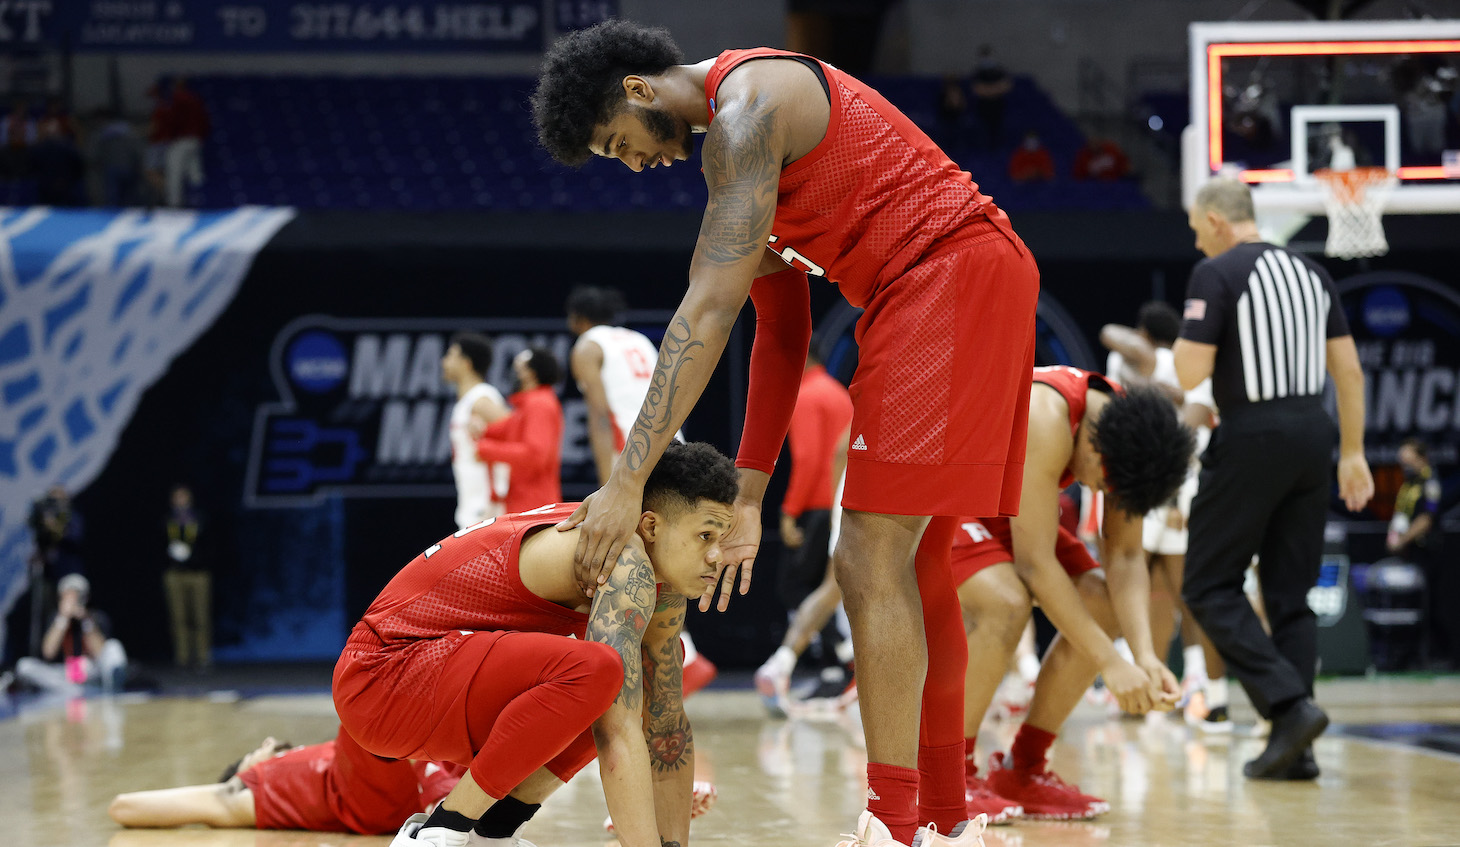 INDIANAPOLIS, INDIANA - MARCH 21: Jacob Young #42 and Myles Johnson #15 of the Rutgers Scarlet Knights react after being defeated by the Houston Cougars 63-60 in the second round game of the 2021 NCAA Men's Basketball Tournament at Lucas Oil Stadium on March 21, 2021 in Indianapolis, Indiana. (Photo by Tim Nwachukwu/Getty Images)